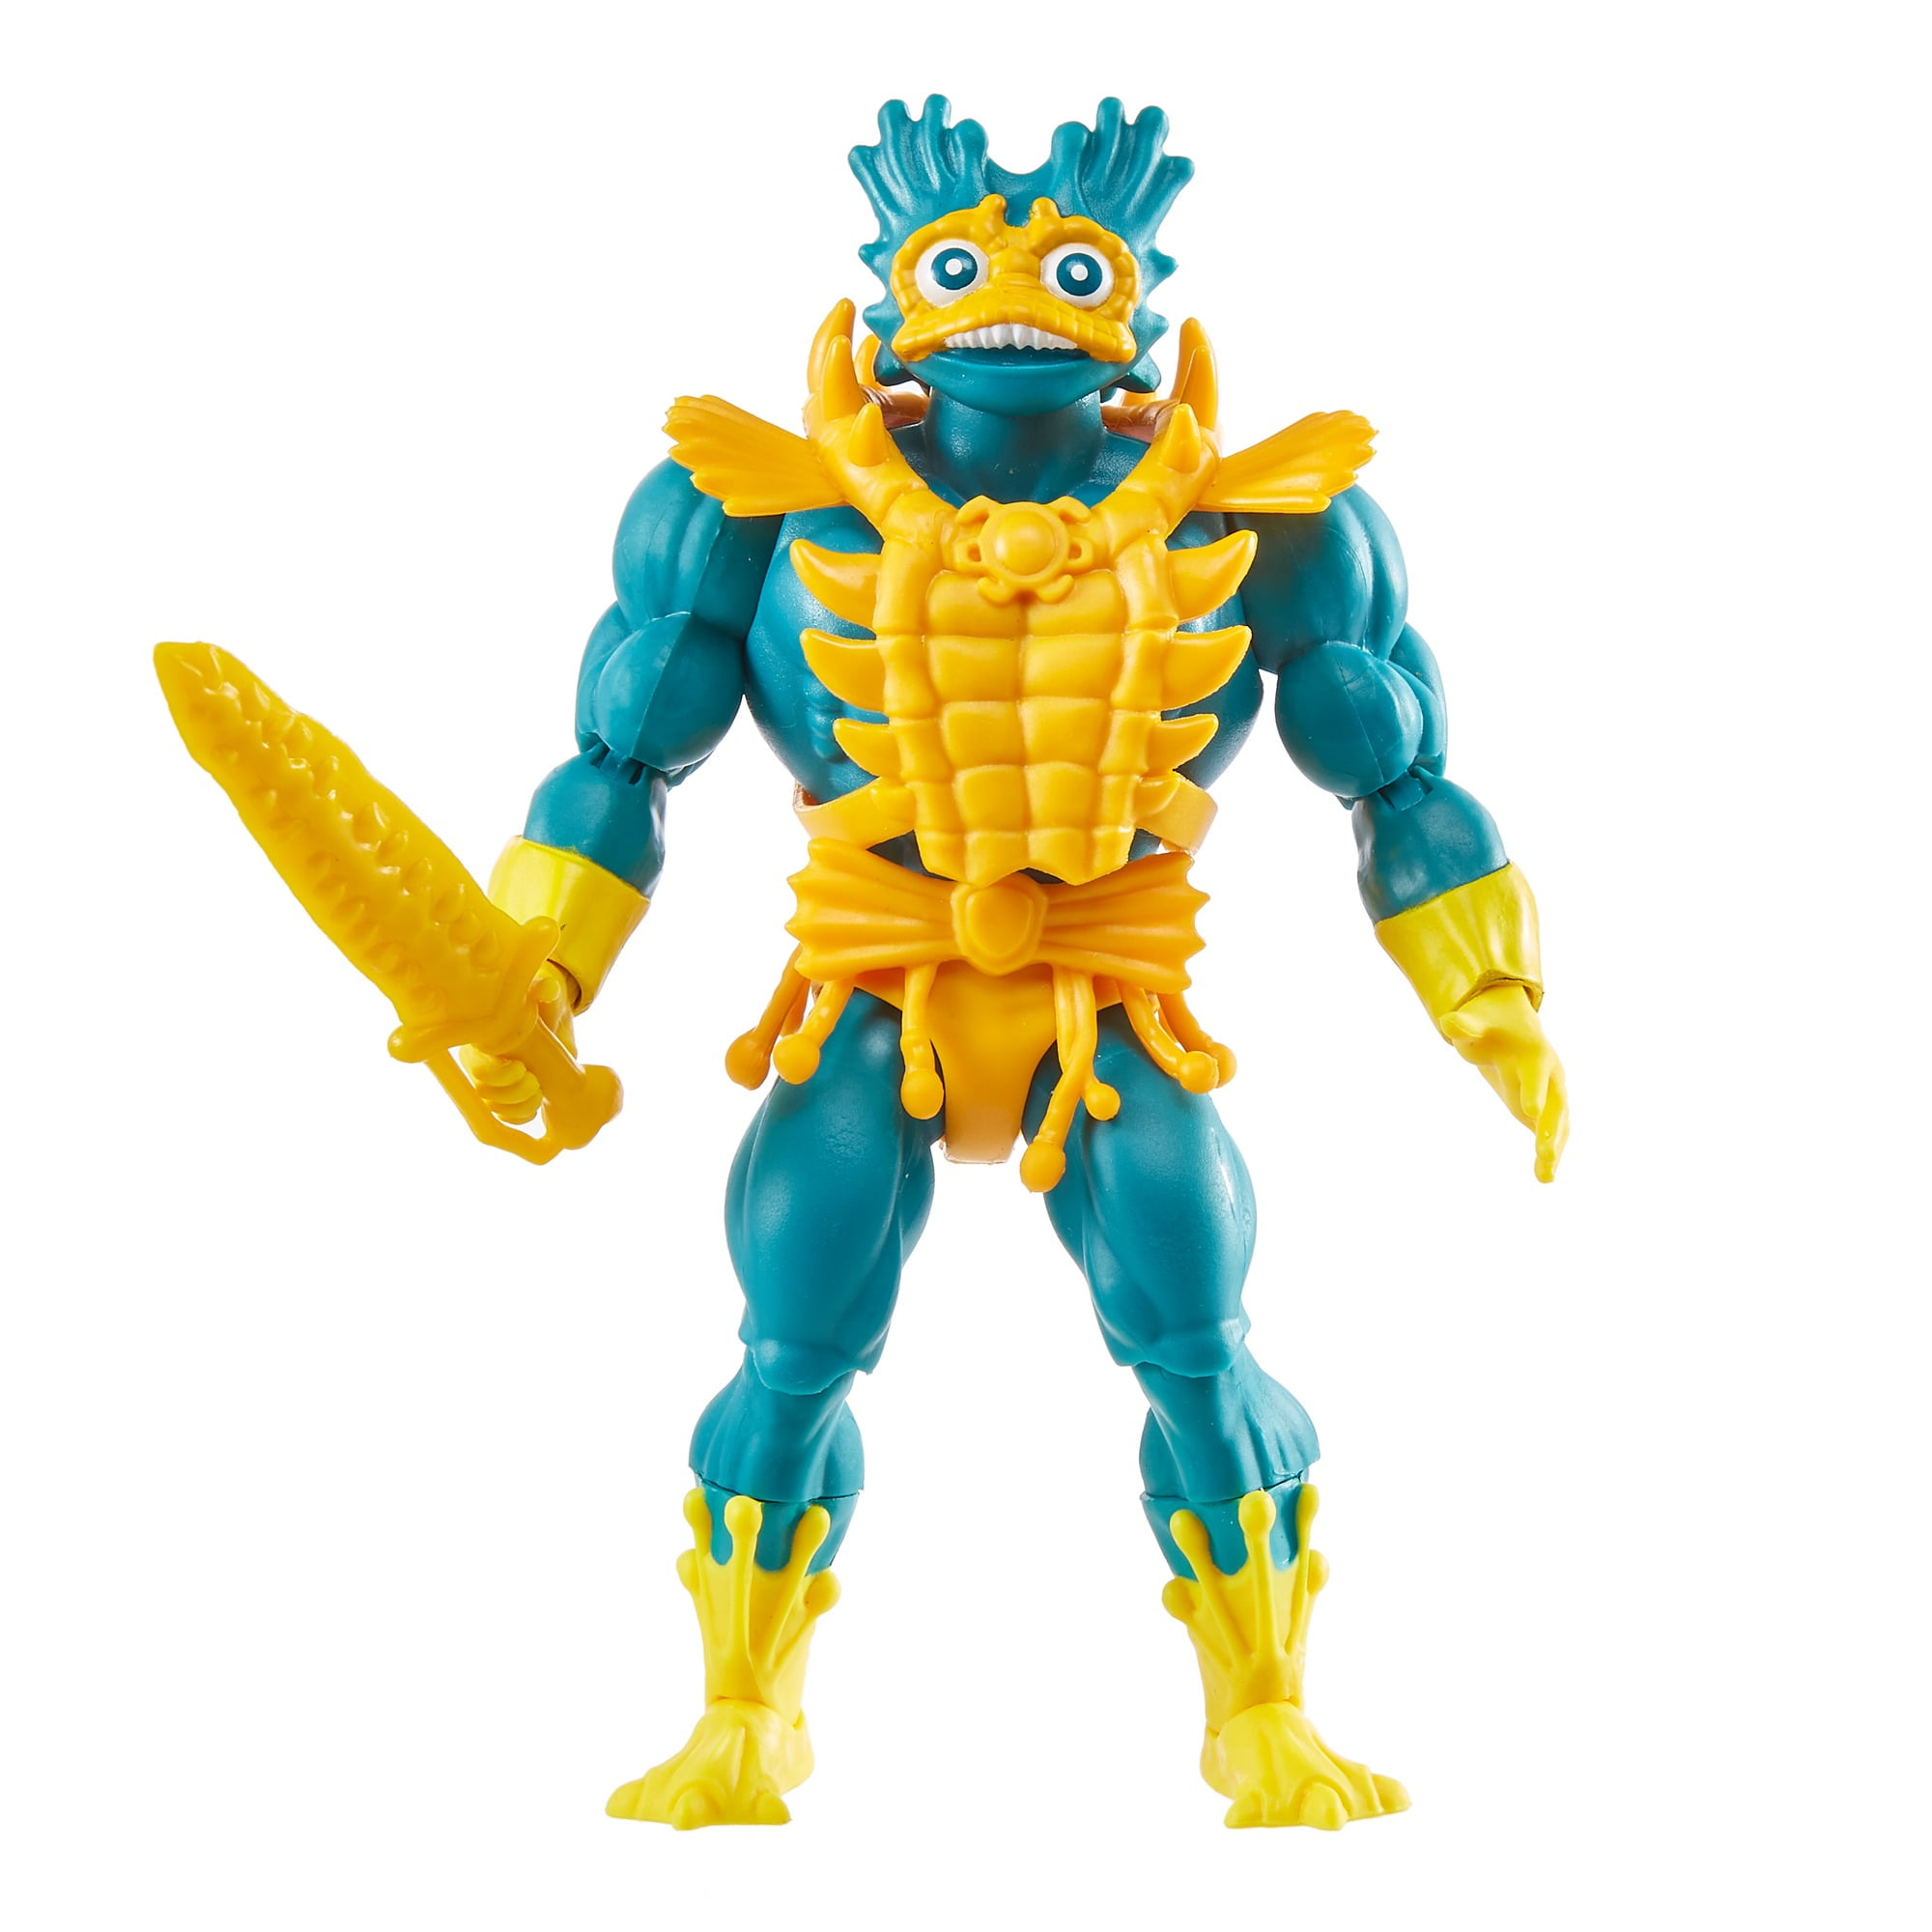 Masters-of-the-Universe-Origins-5-5-in-Mer-Man-Action-Figure-Battle-Figure-for-Storytelling-Play-and-Display_b8fd412c-8f90-4564-a735-fbd5369cf9d9.269b77669c824caacfbe30f030e346e6.jpeg